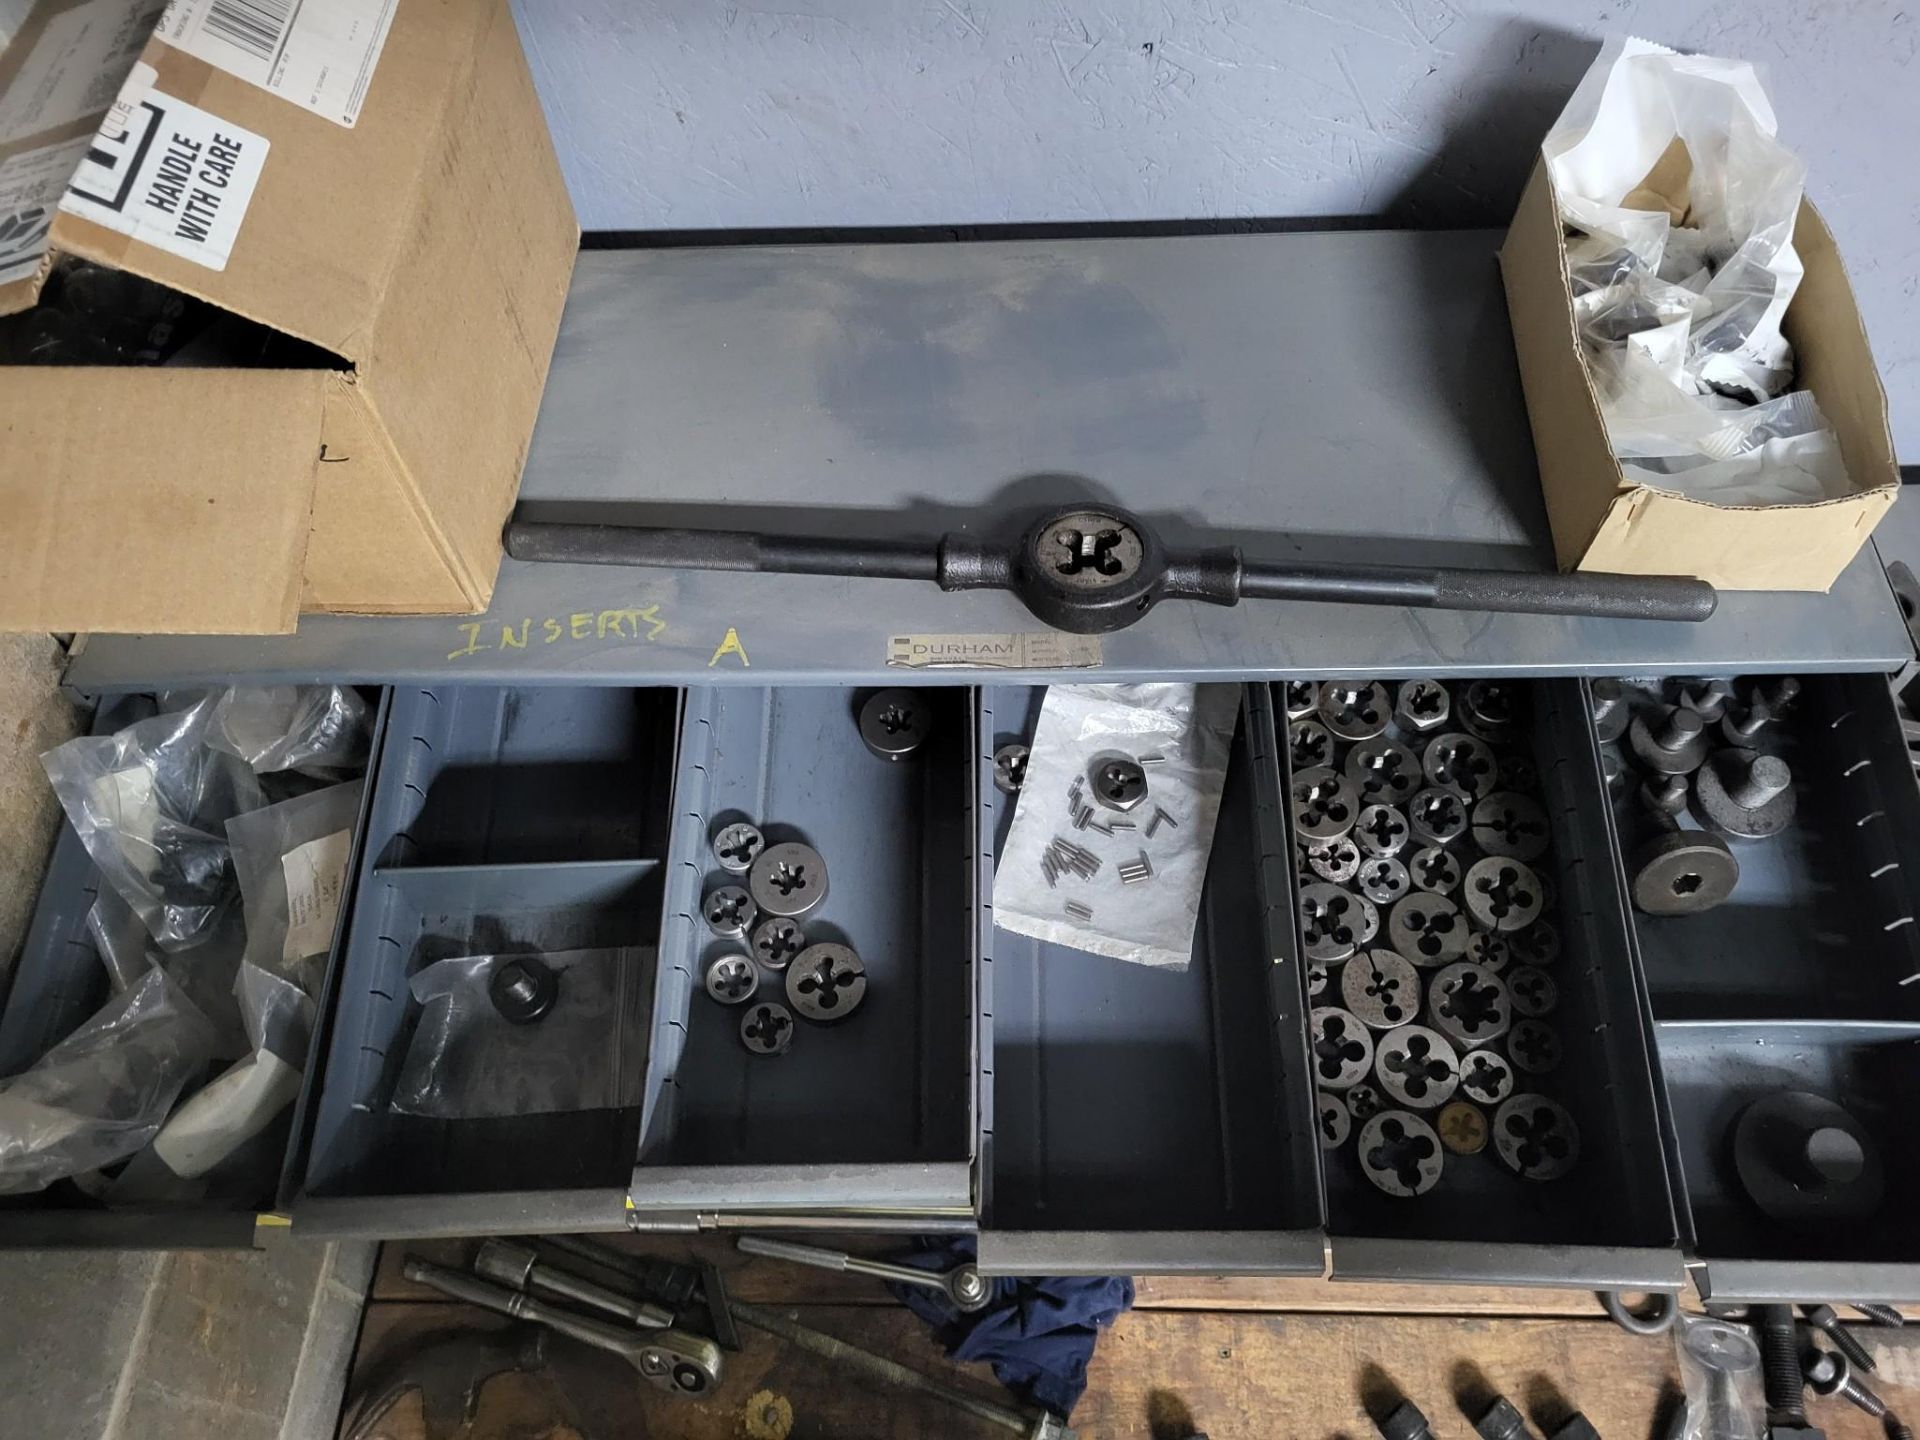 LARGE LOT OF MILLING TOOLS, TAPS, CARBIDE INSERTS, SETUP HARDWARE AND HAND TOOLS - Image 10 of 24